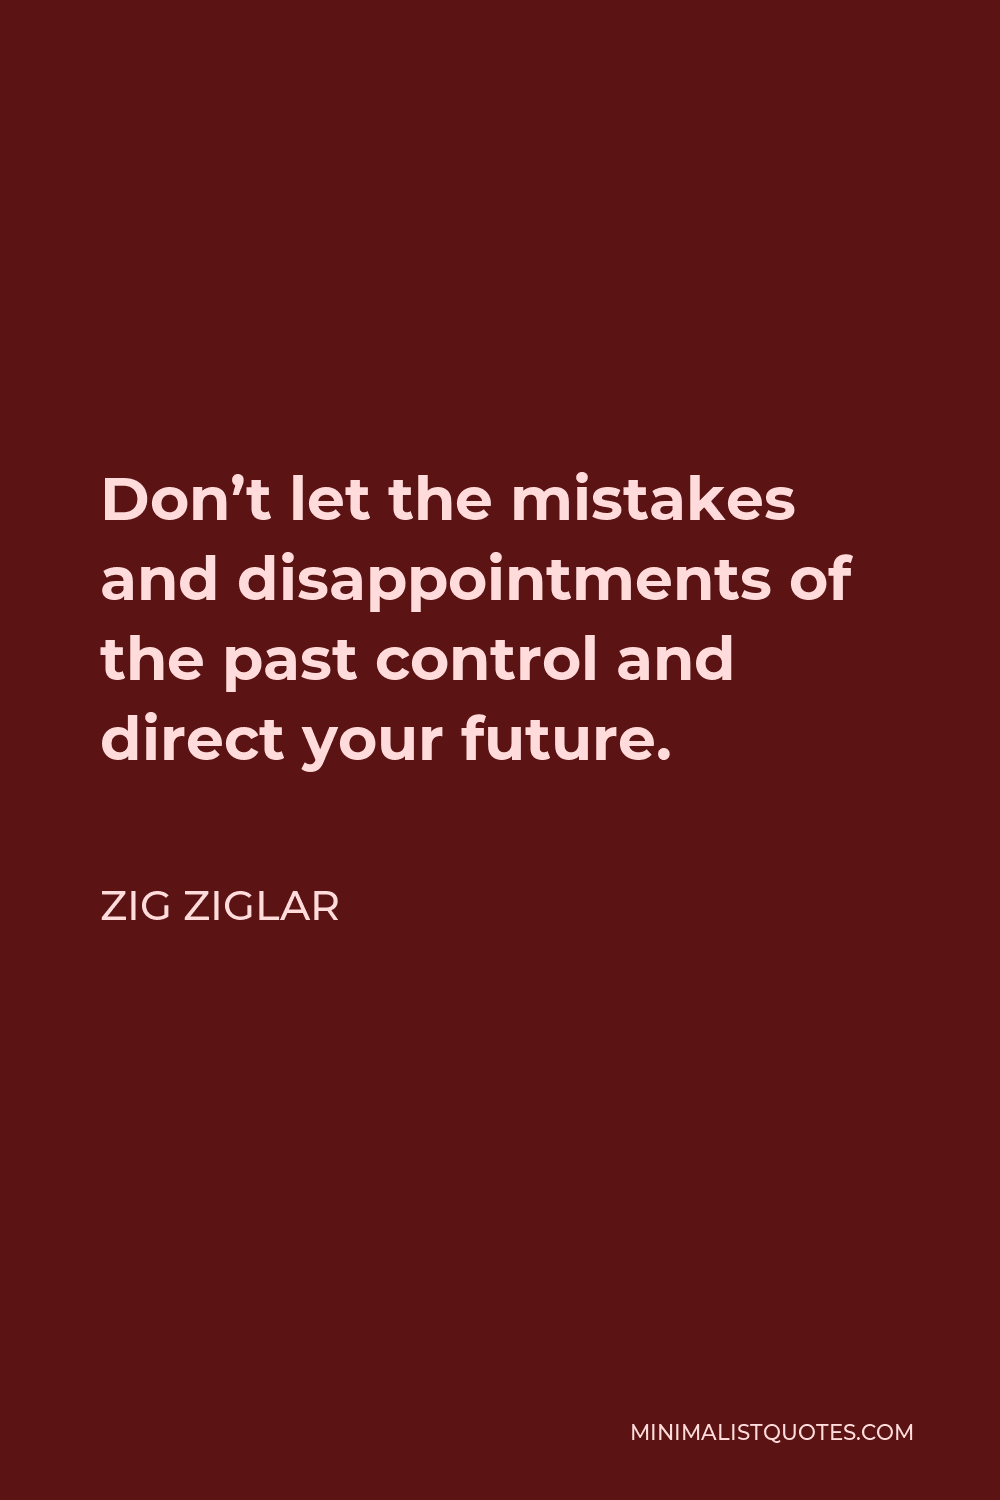 Zig Ziglar Quote - Don’t let the mistakes and disappointments of the past control and direct your future.